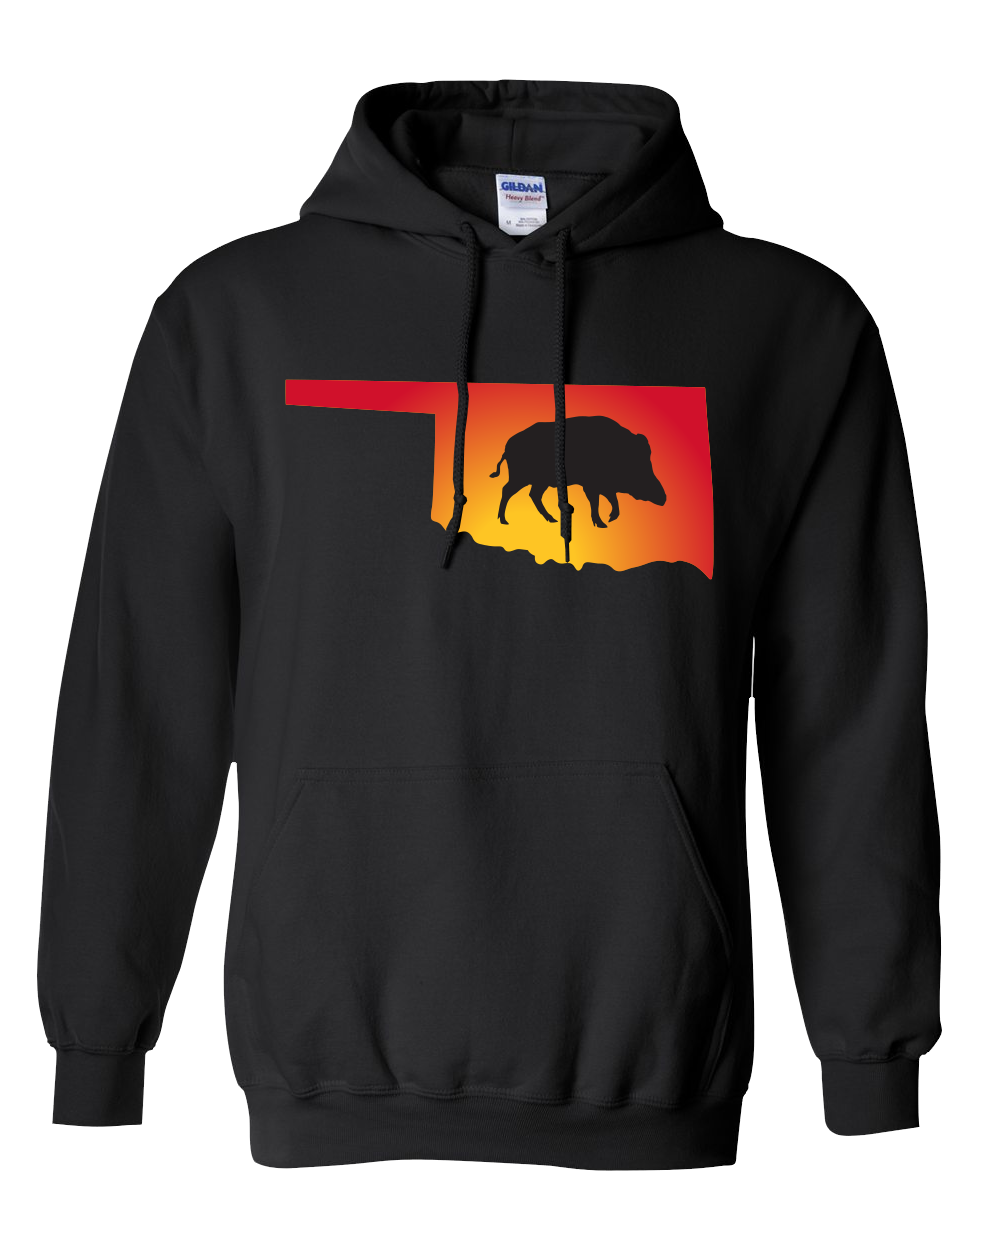 Pullover Hooded Sweatshirt Oklahoma Black Wild Hog Vibrant Design High Quality Tight Knit Ring Spun Low Maintenance Cotton Printed With The Newest Available Color Transfer Technology